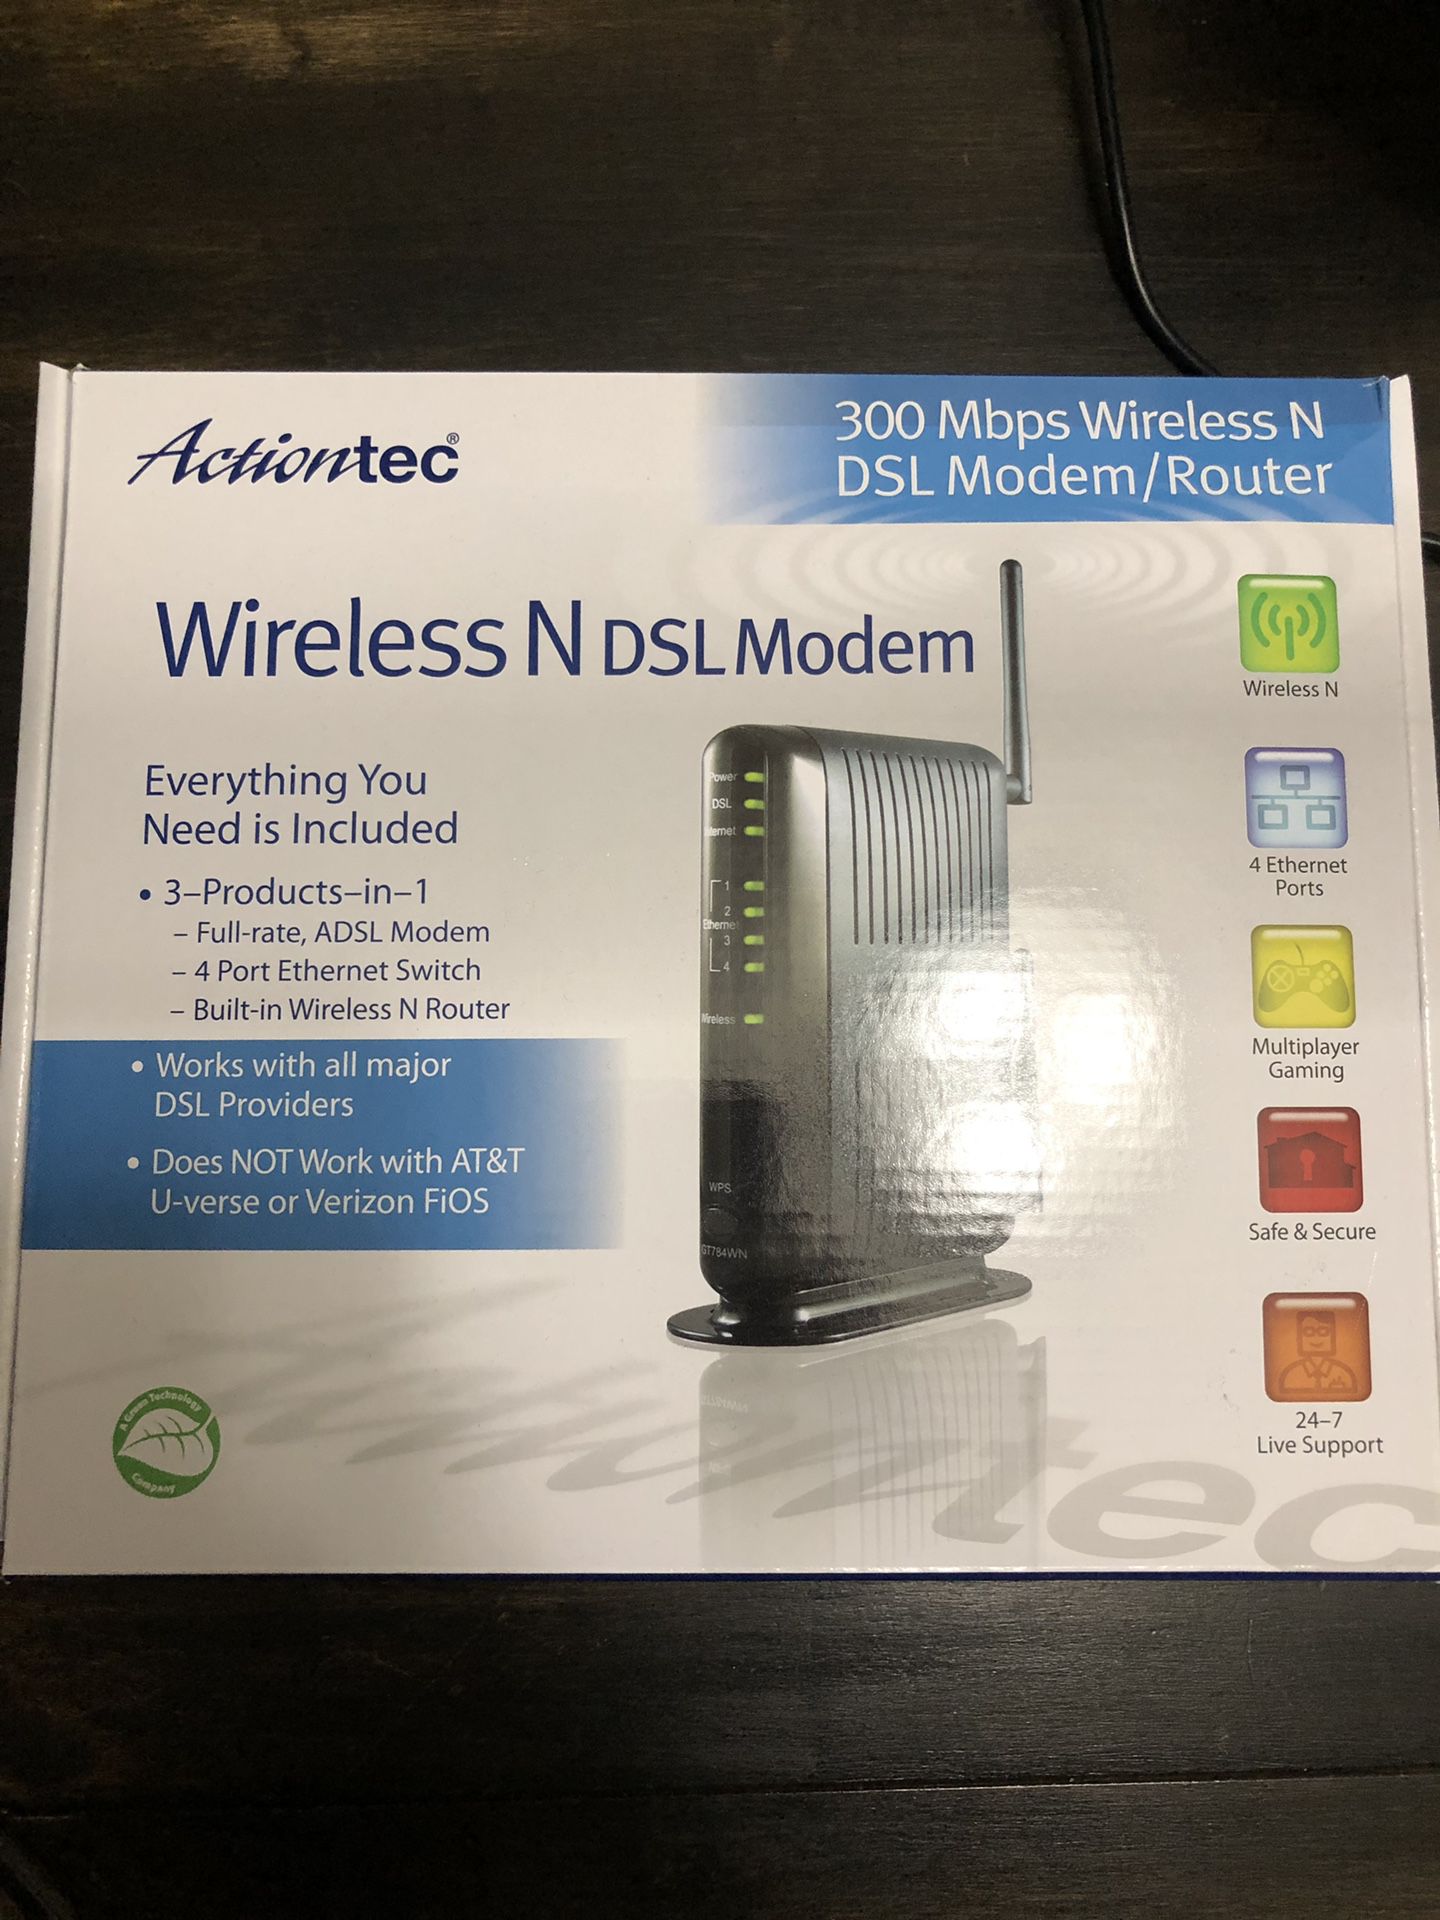 Actiontec 300 mbps Wireless N DSL Modem/ Router